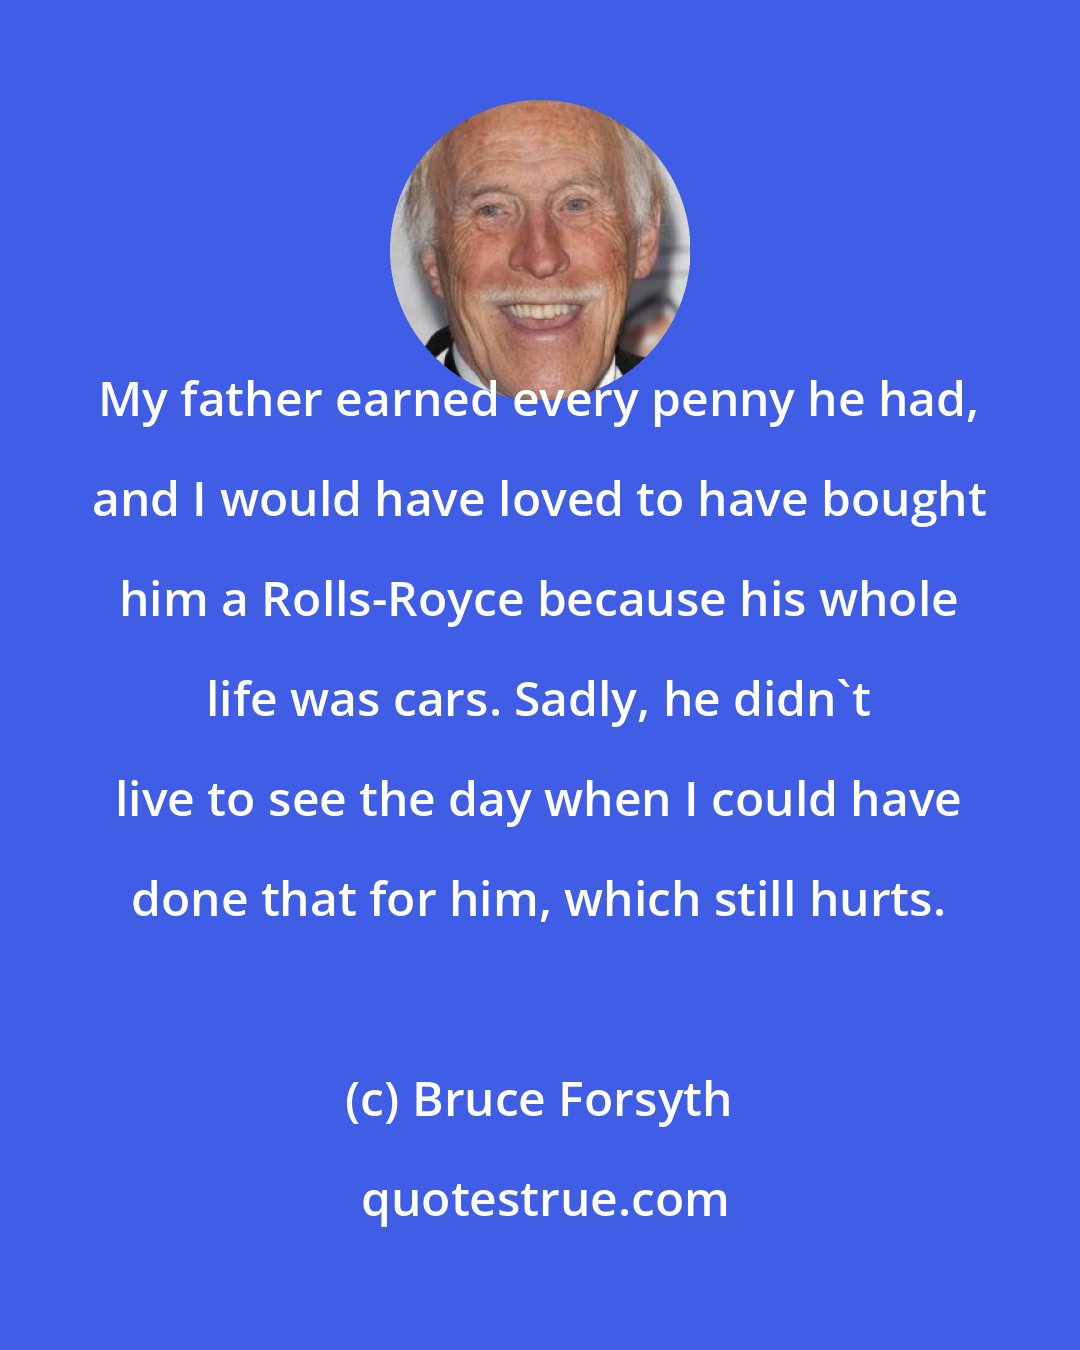 Bruce Forsyth: My father earned every penny he had, and I would have loved to have bought him a Rolls-Royce because his whole life was cars. Sadly, he didn't live to see the day when I could have done that for him, which still hurts.